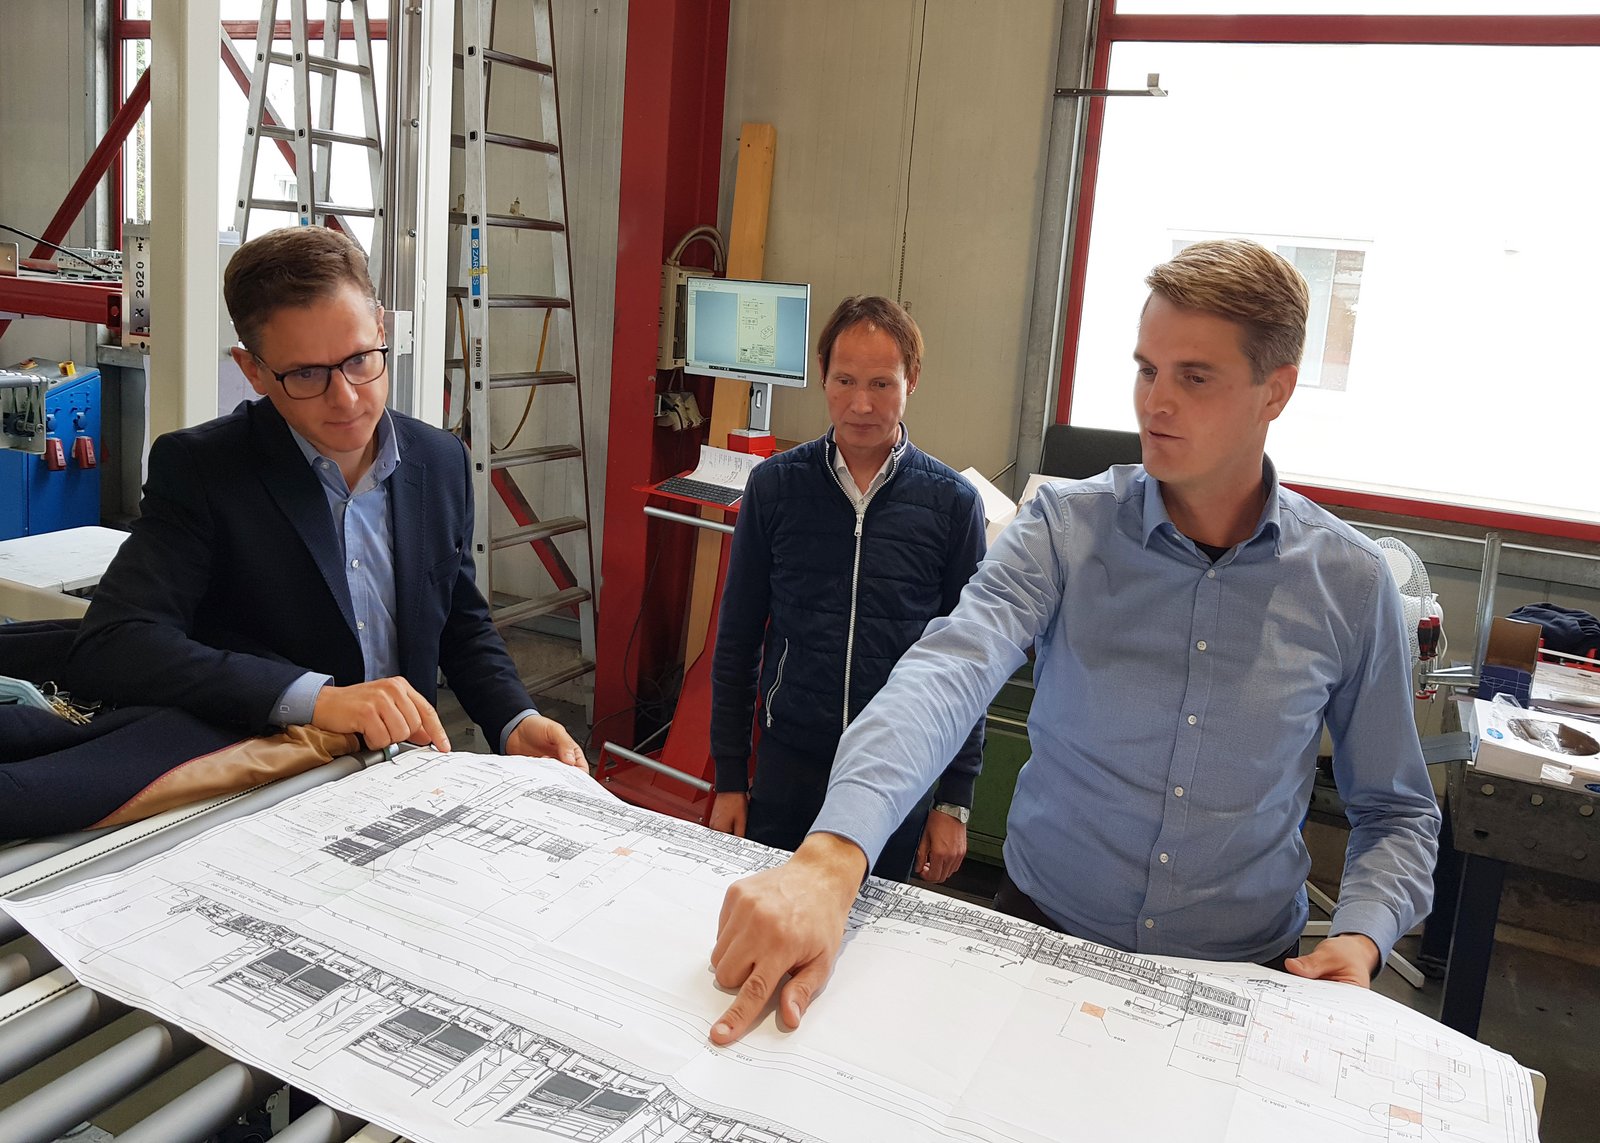 Benedikt Rotte shows Carsten Linnemann an automation system for a large kitchen manufacturer from OWL, Germany